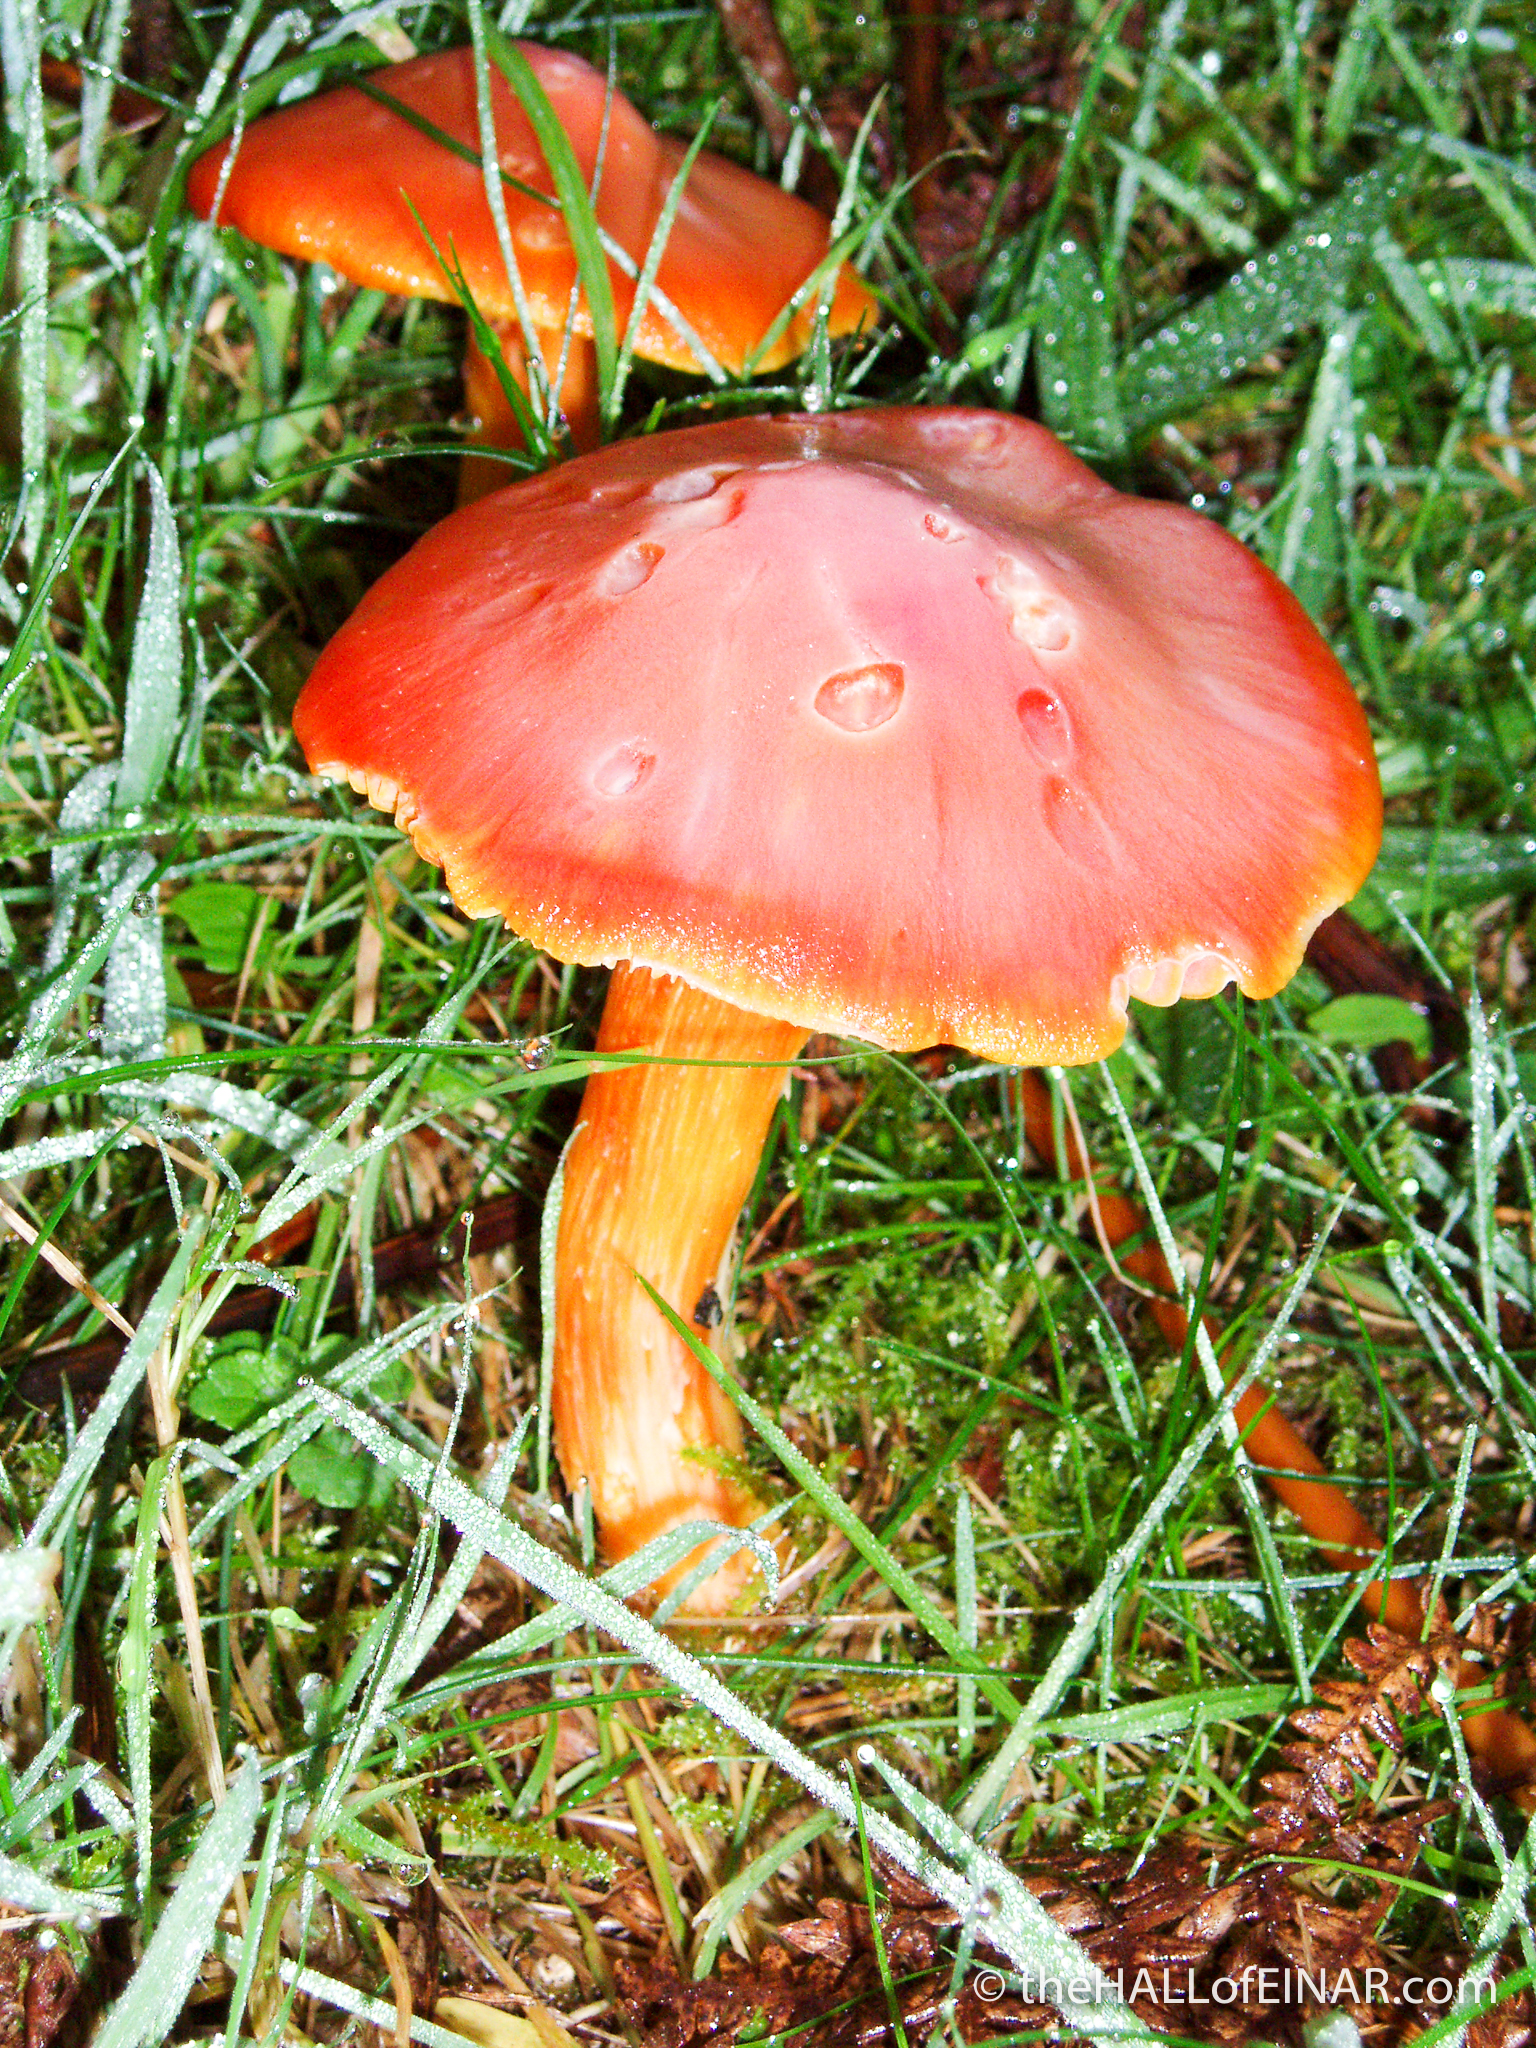 Hygrocybe punicea - The Hall of Einar - photograph (c) David Bailey (not the)